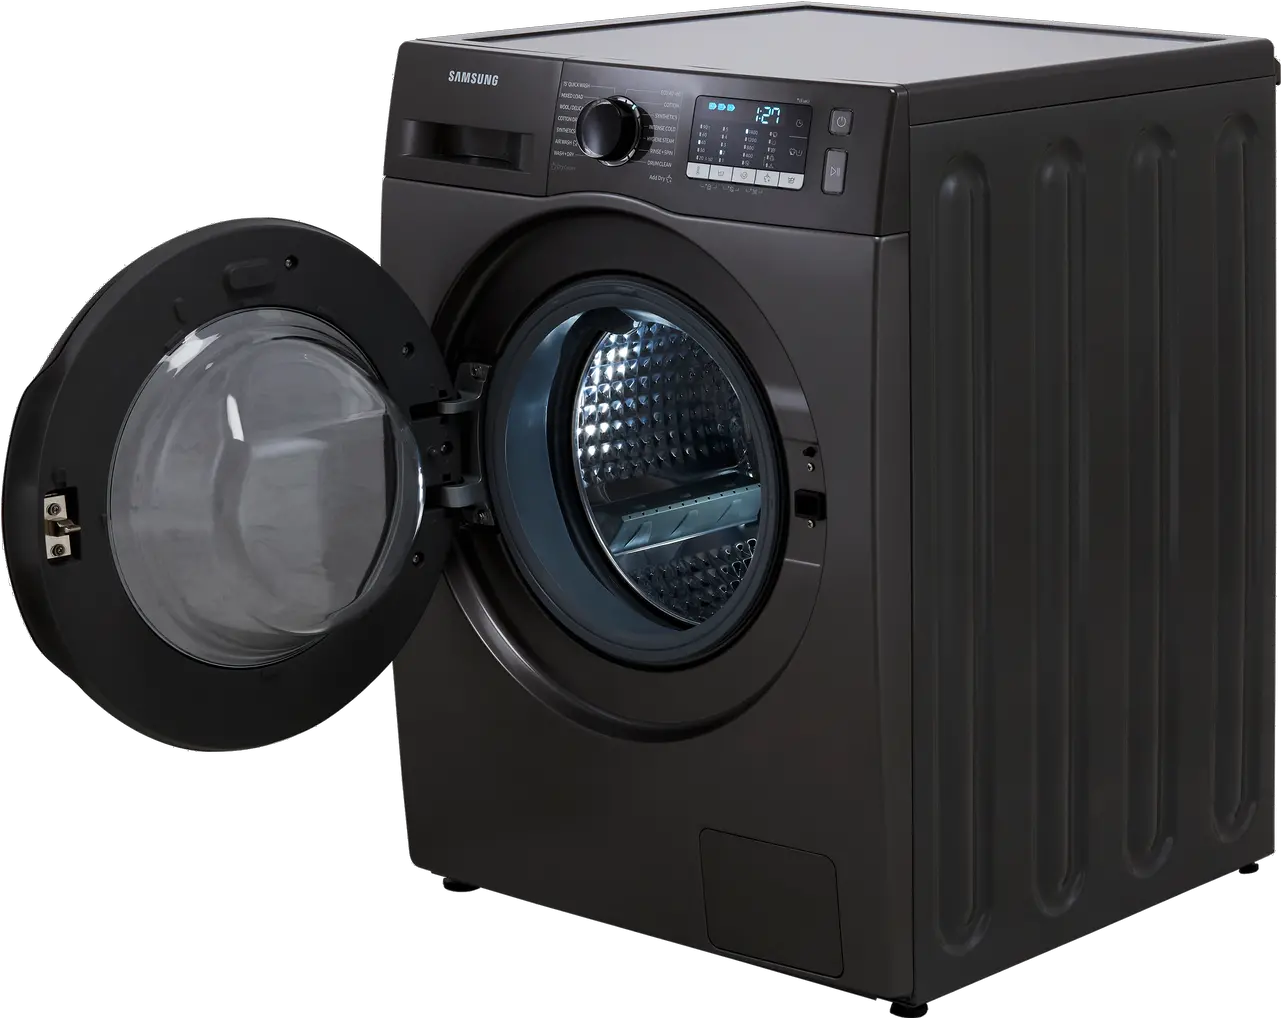 Samsung Wd90ta046bx Free Standing Washing Machine Png The Purse With A Smiley Face Icon For Samsung Dryers